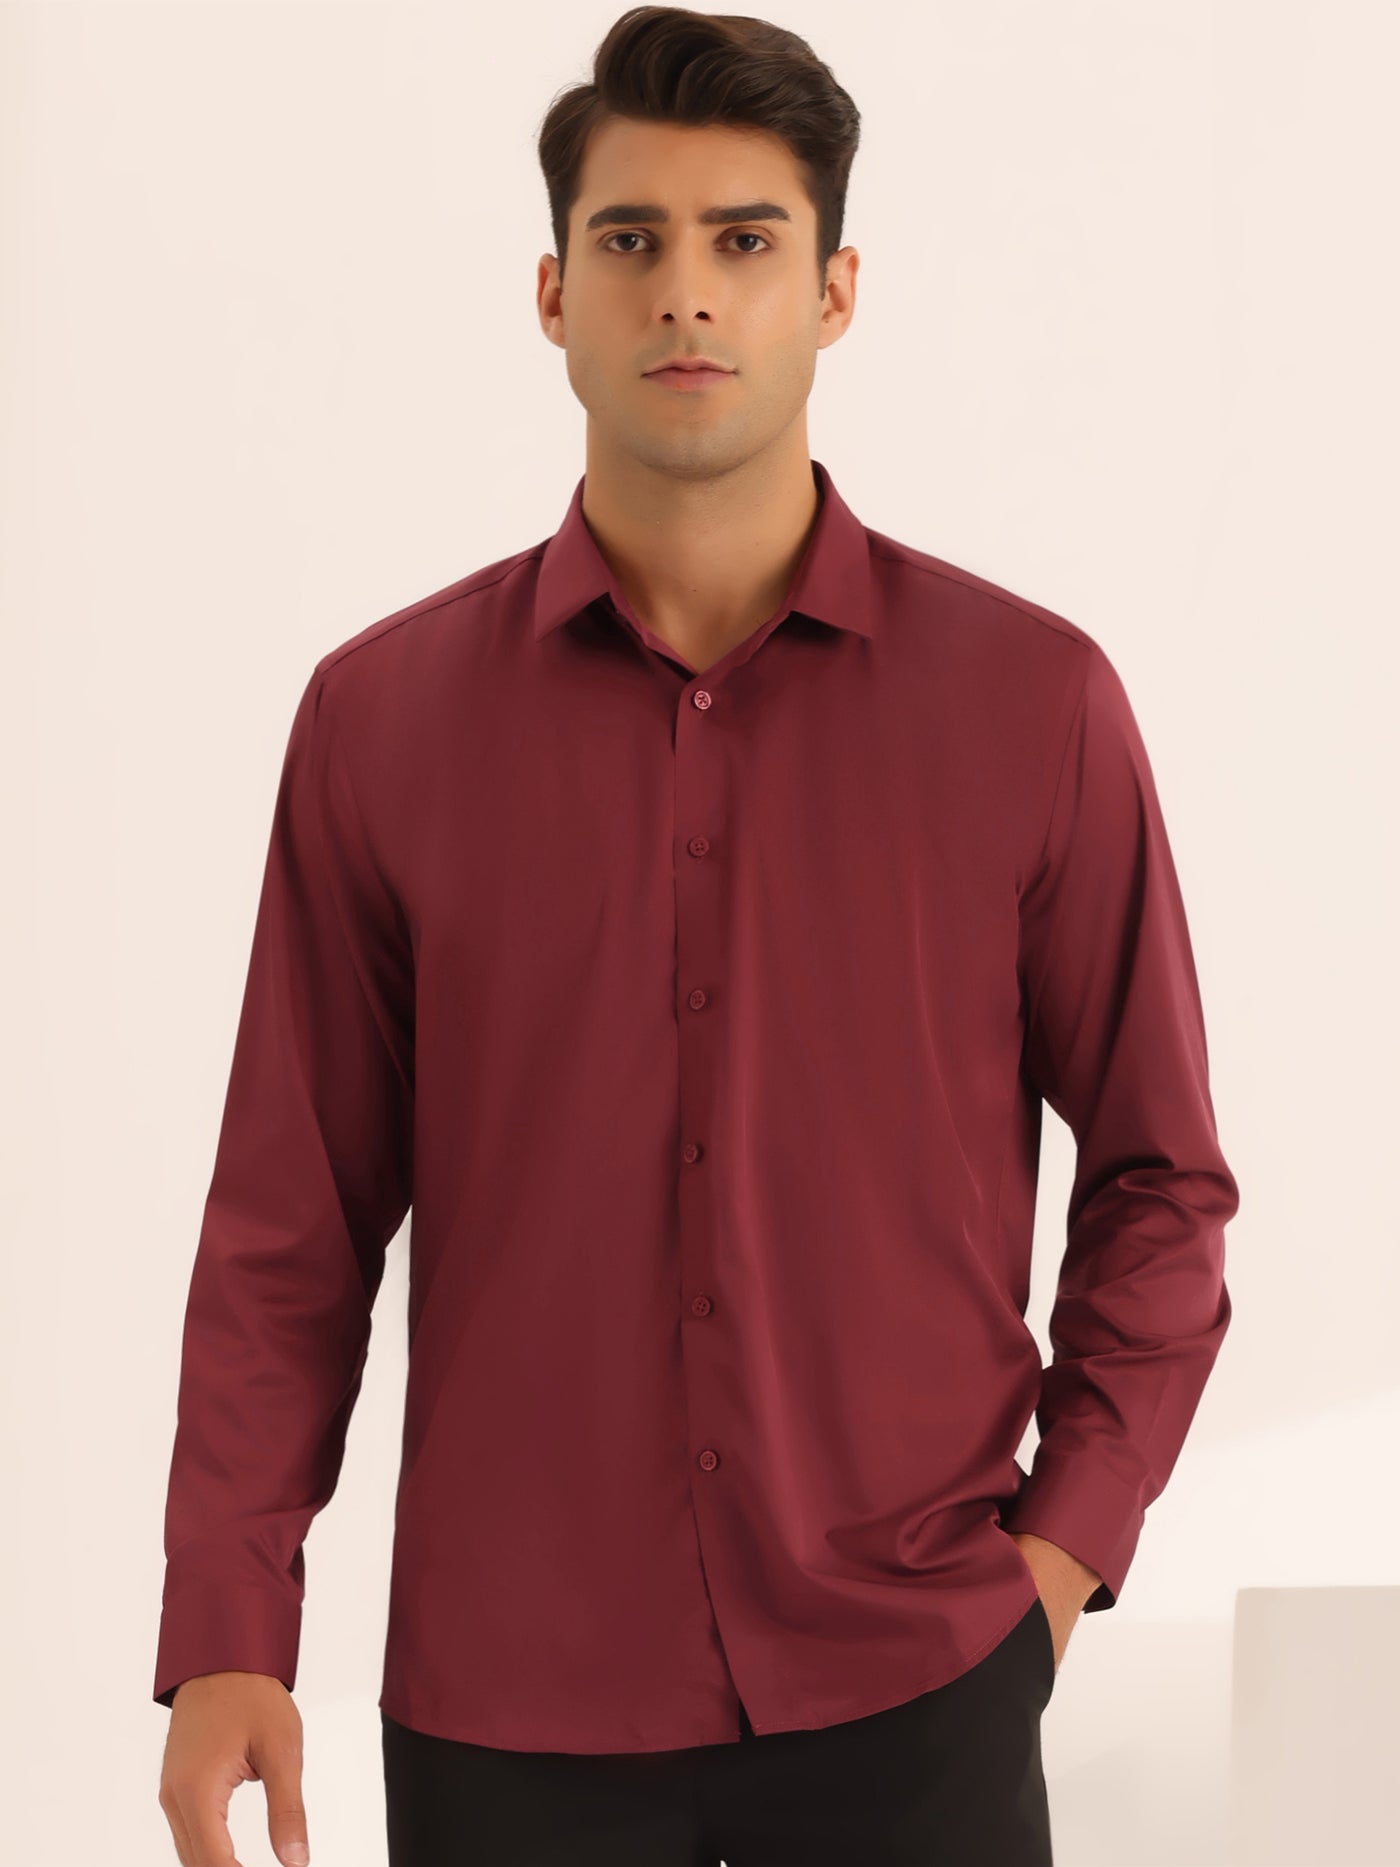 Bublédon Long Sleeves Button Down Business Prom Shirts